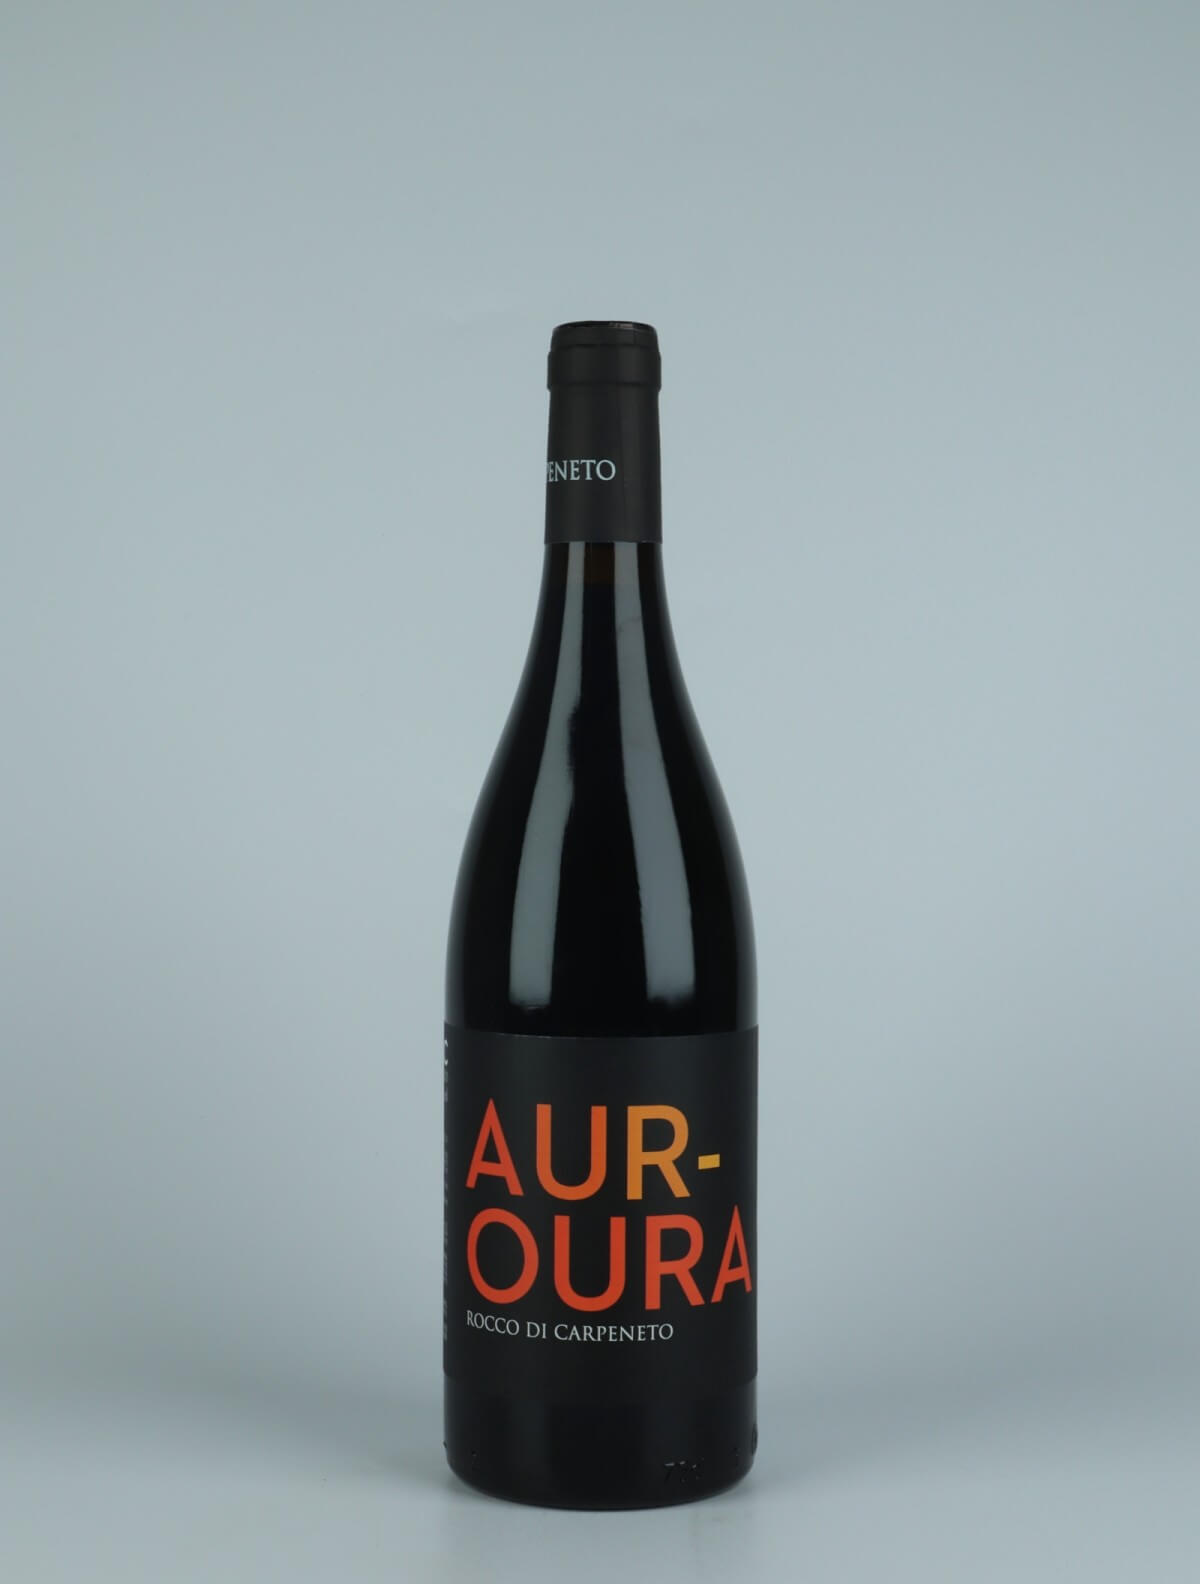 A bottle 2021 Aur-Oura Red wine from Rocco di Carpeneto, Piedmont in Italy